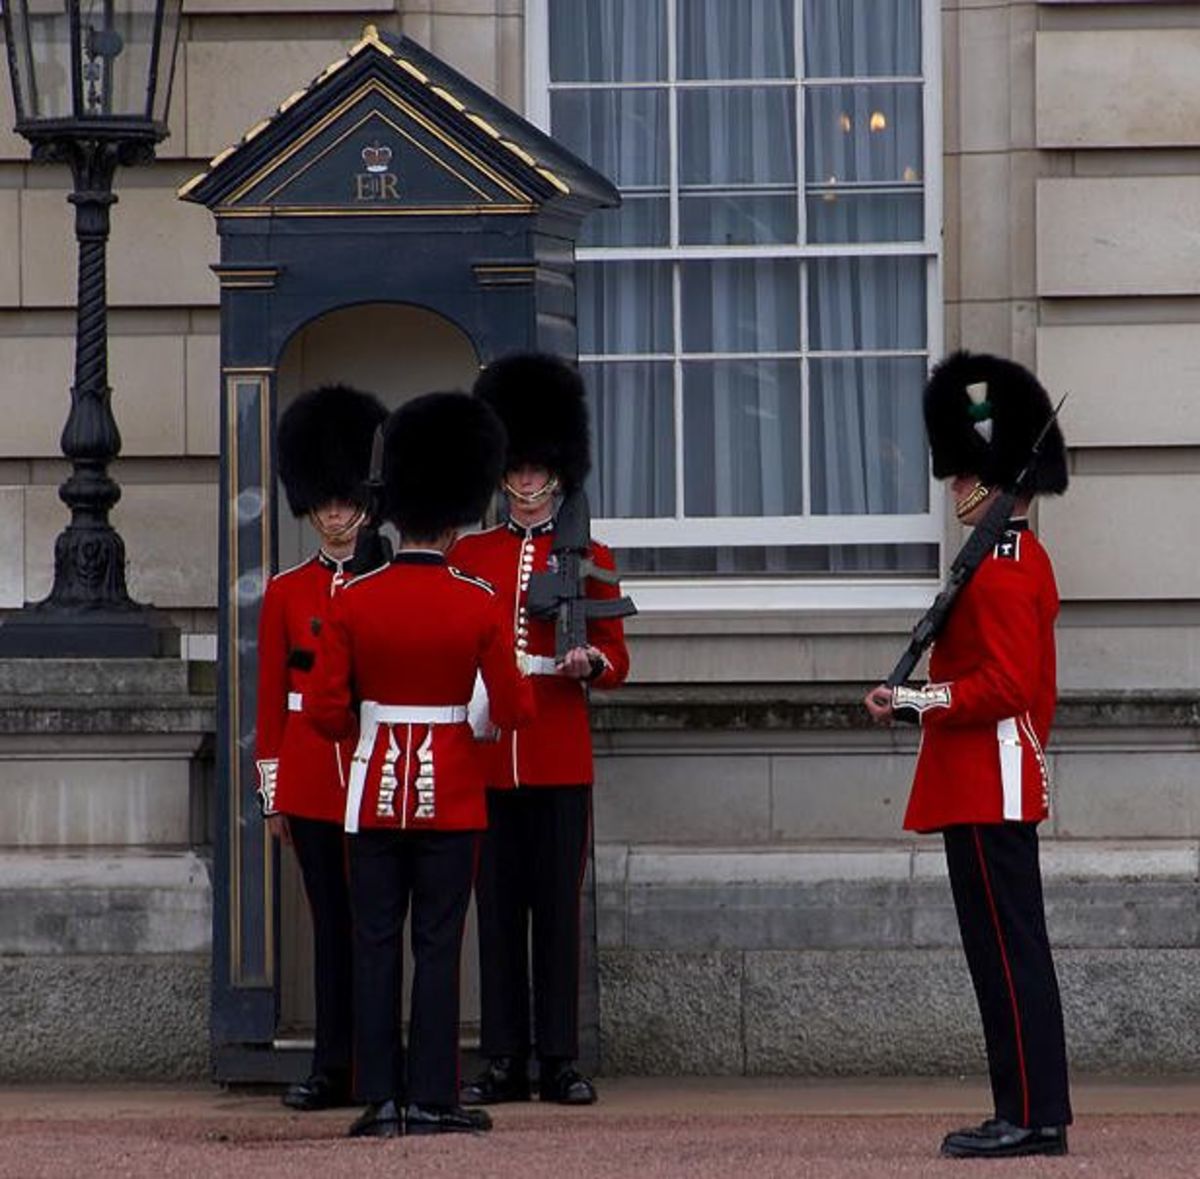 Buckingham Palace guards must stand for hours in hot woolen uniforms and bearskin hats. They're also expected to faint with dignity! 